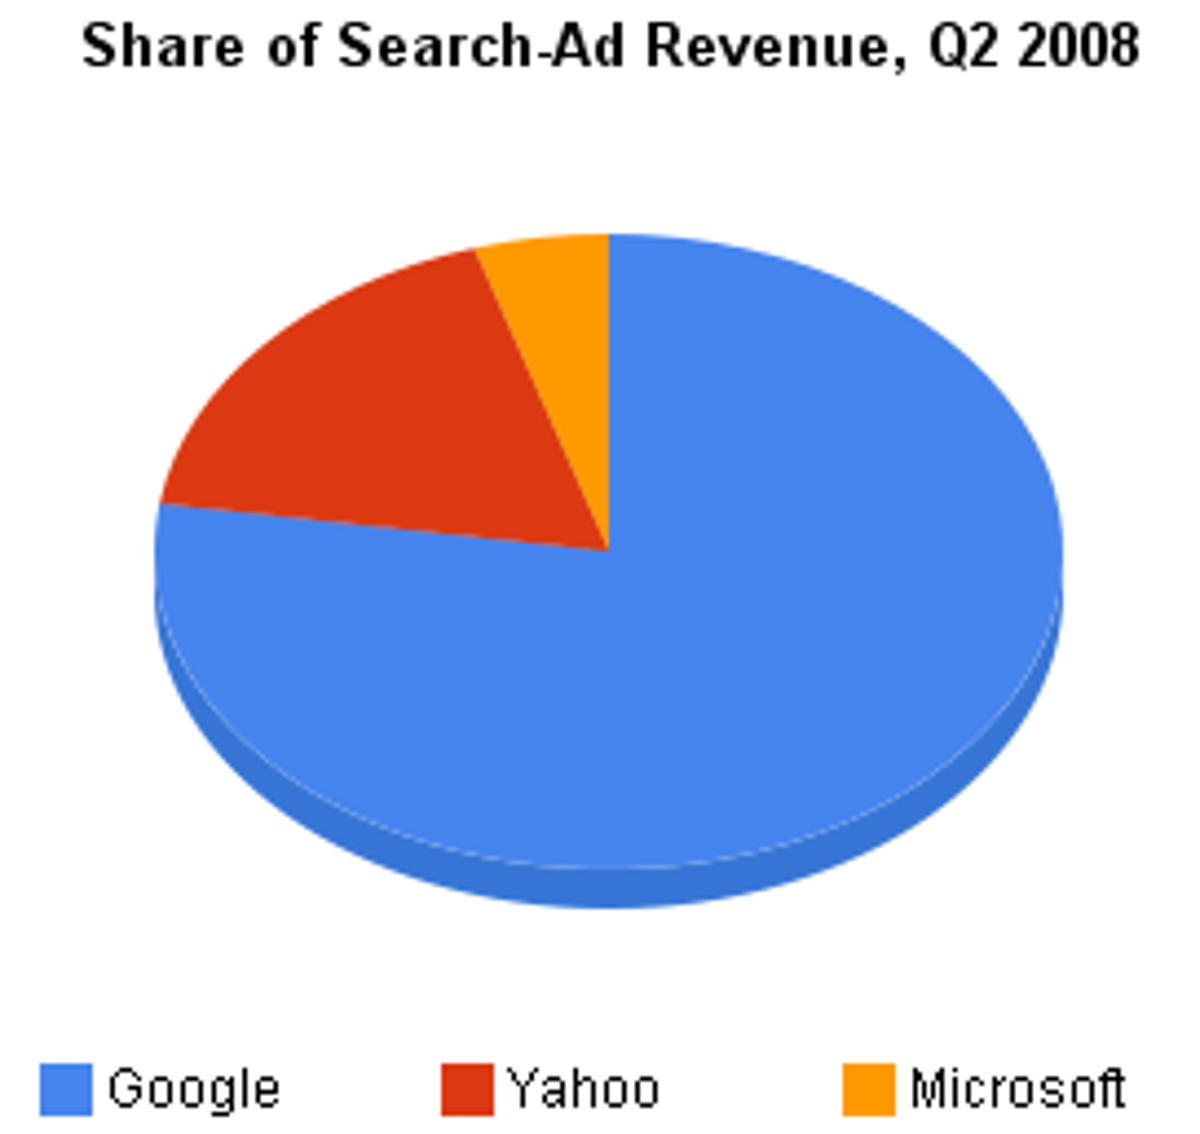 Google dominates the share of search ad spending measured by Efficient Frontier.